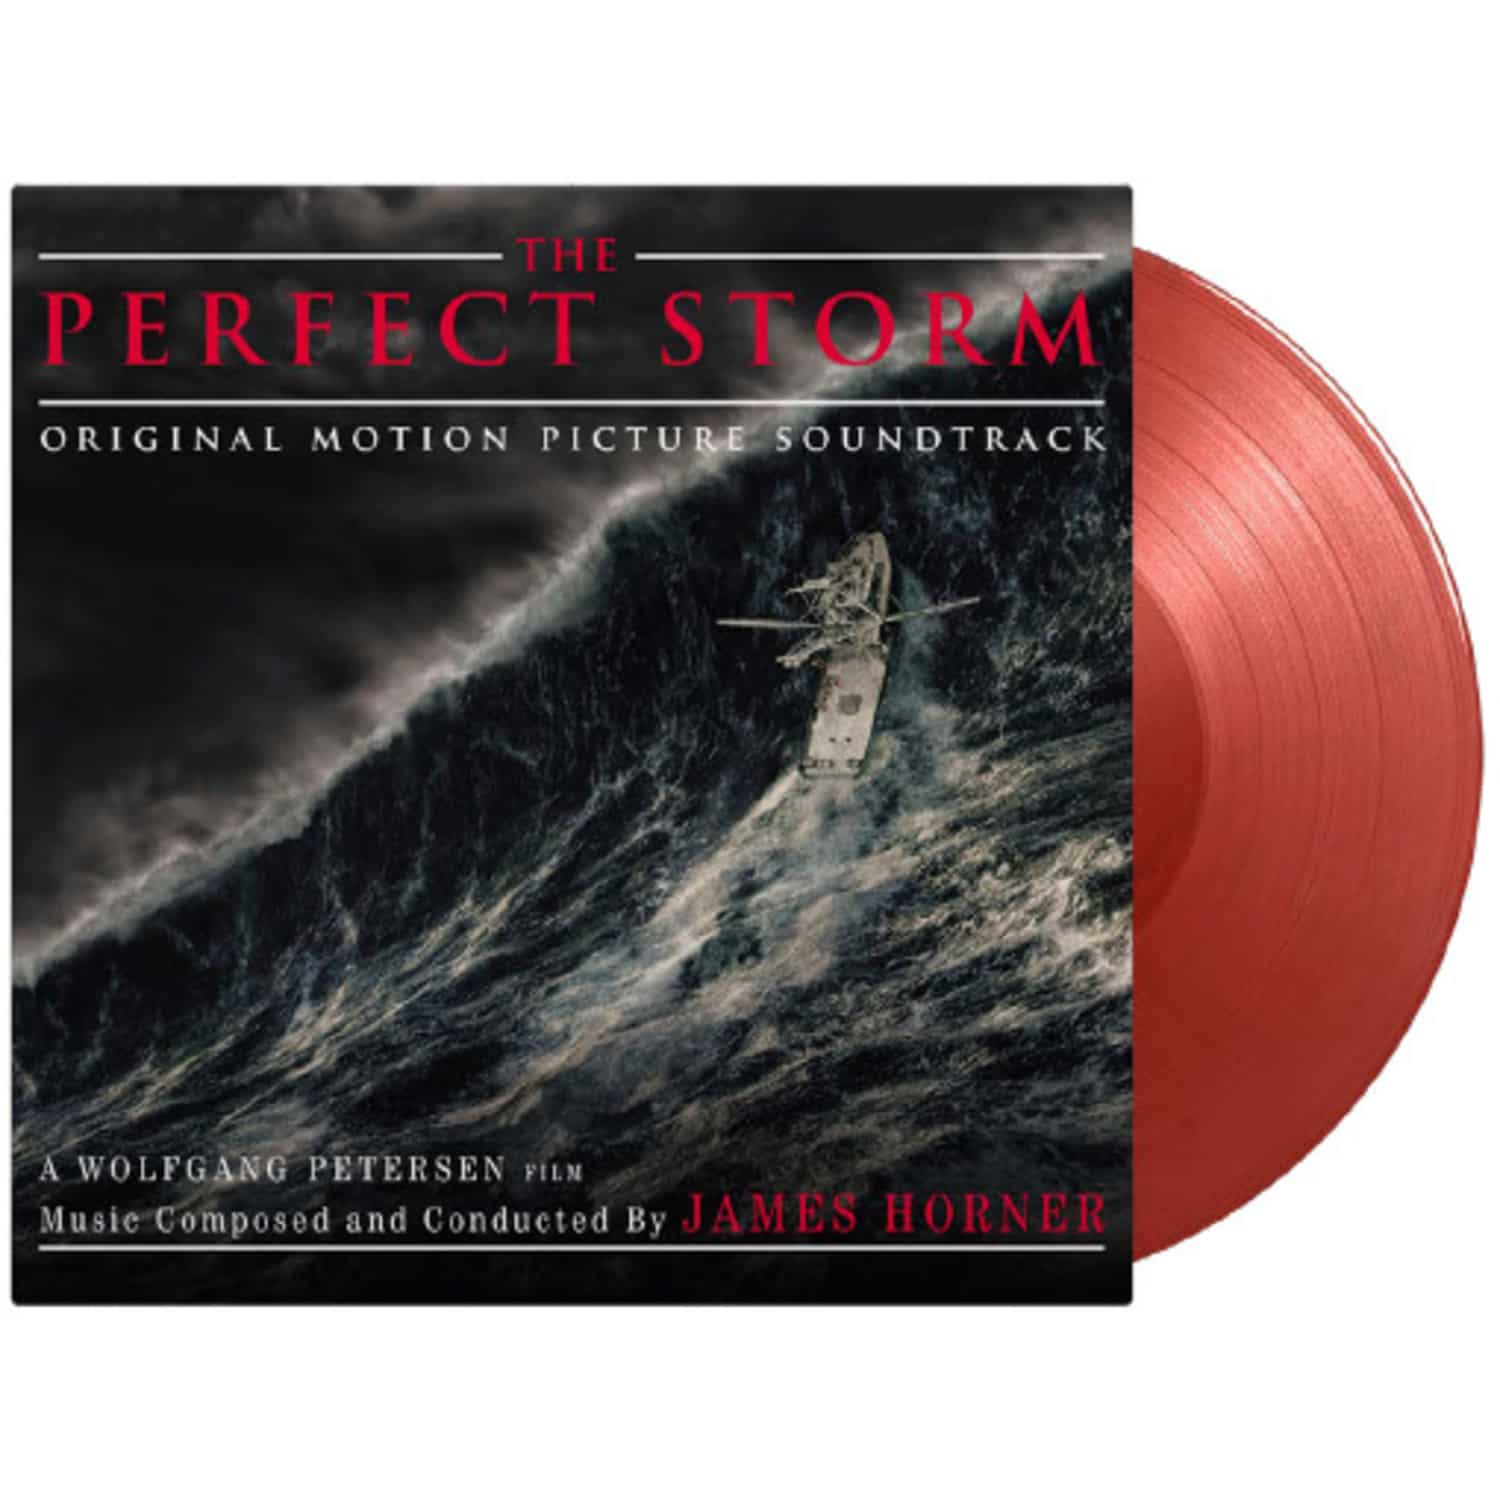 Ost - PERFECT STORM 